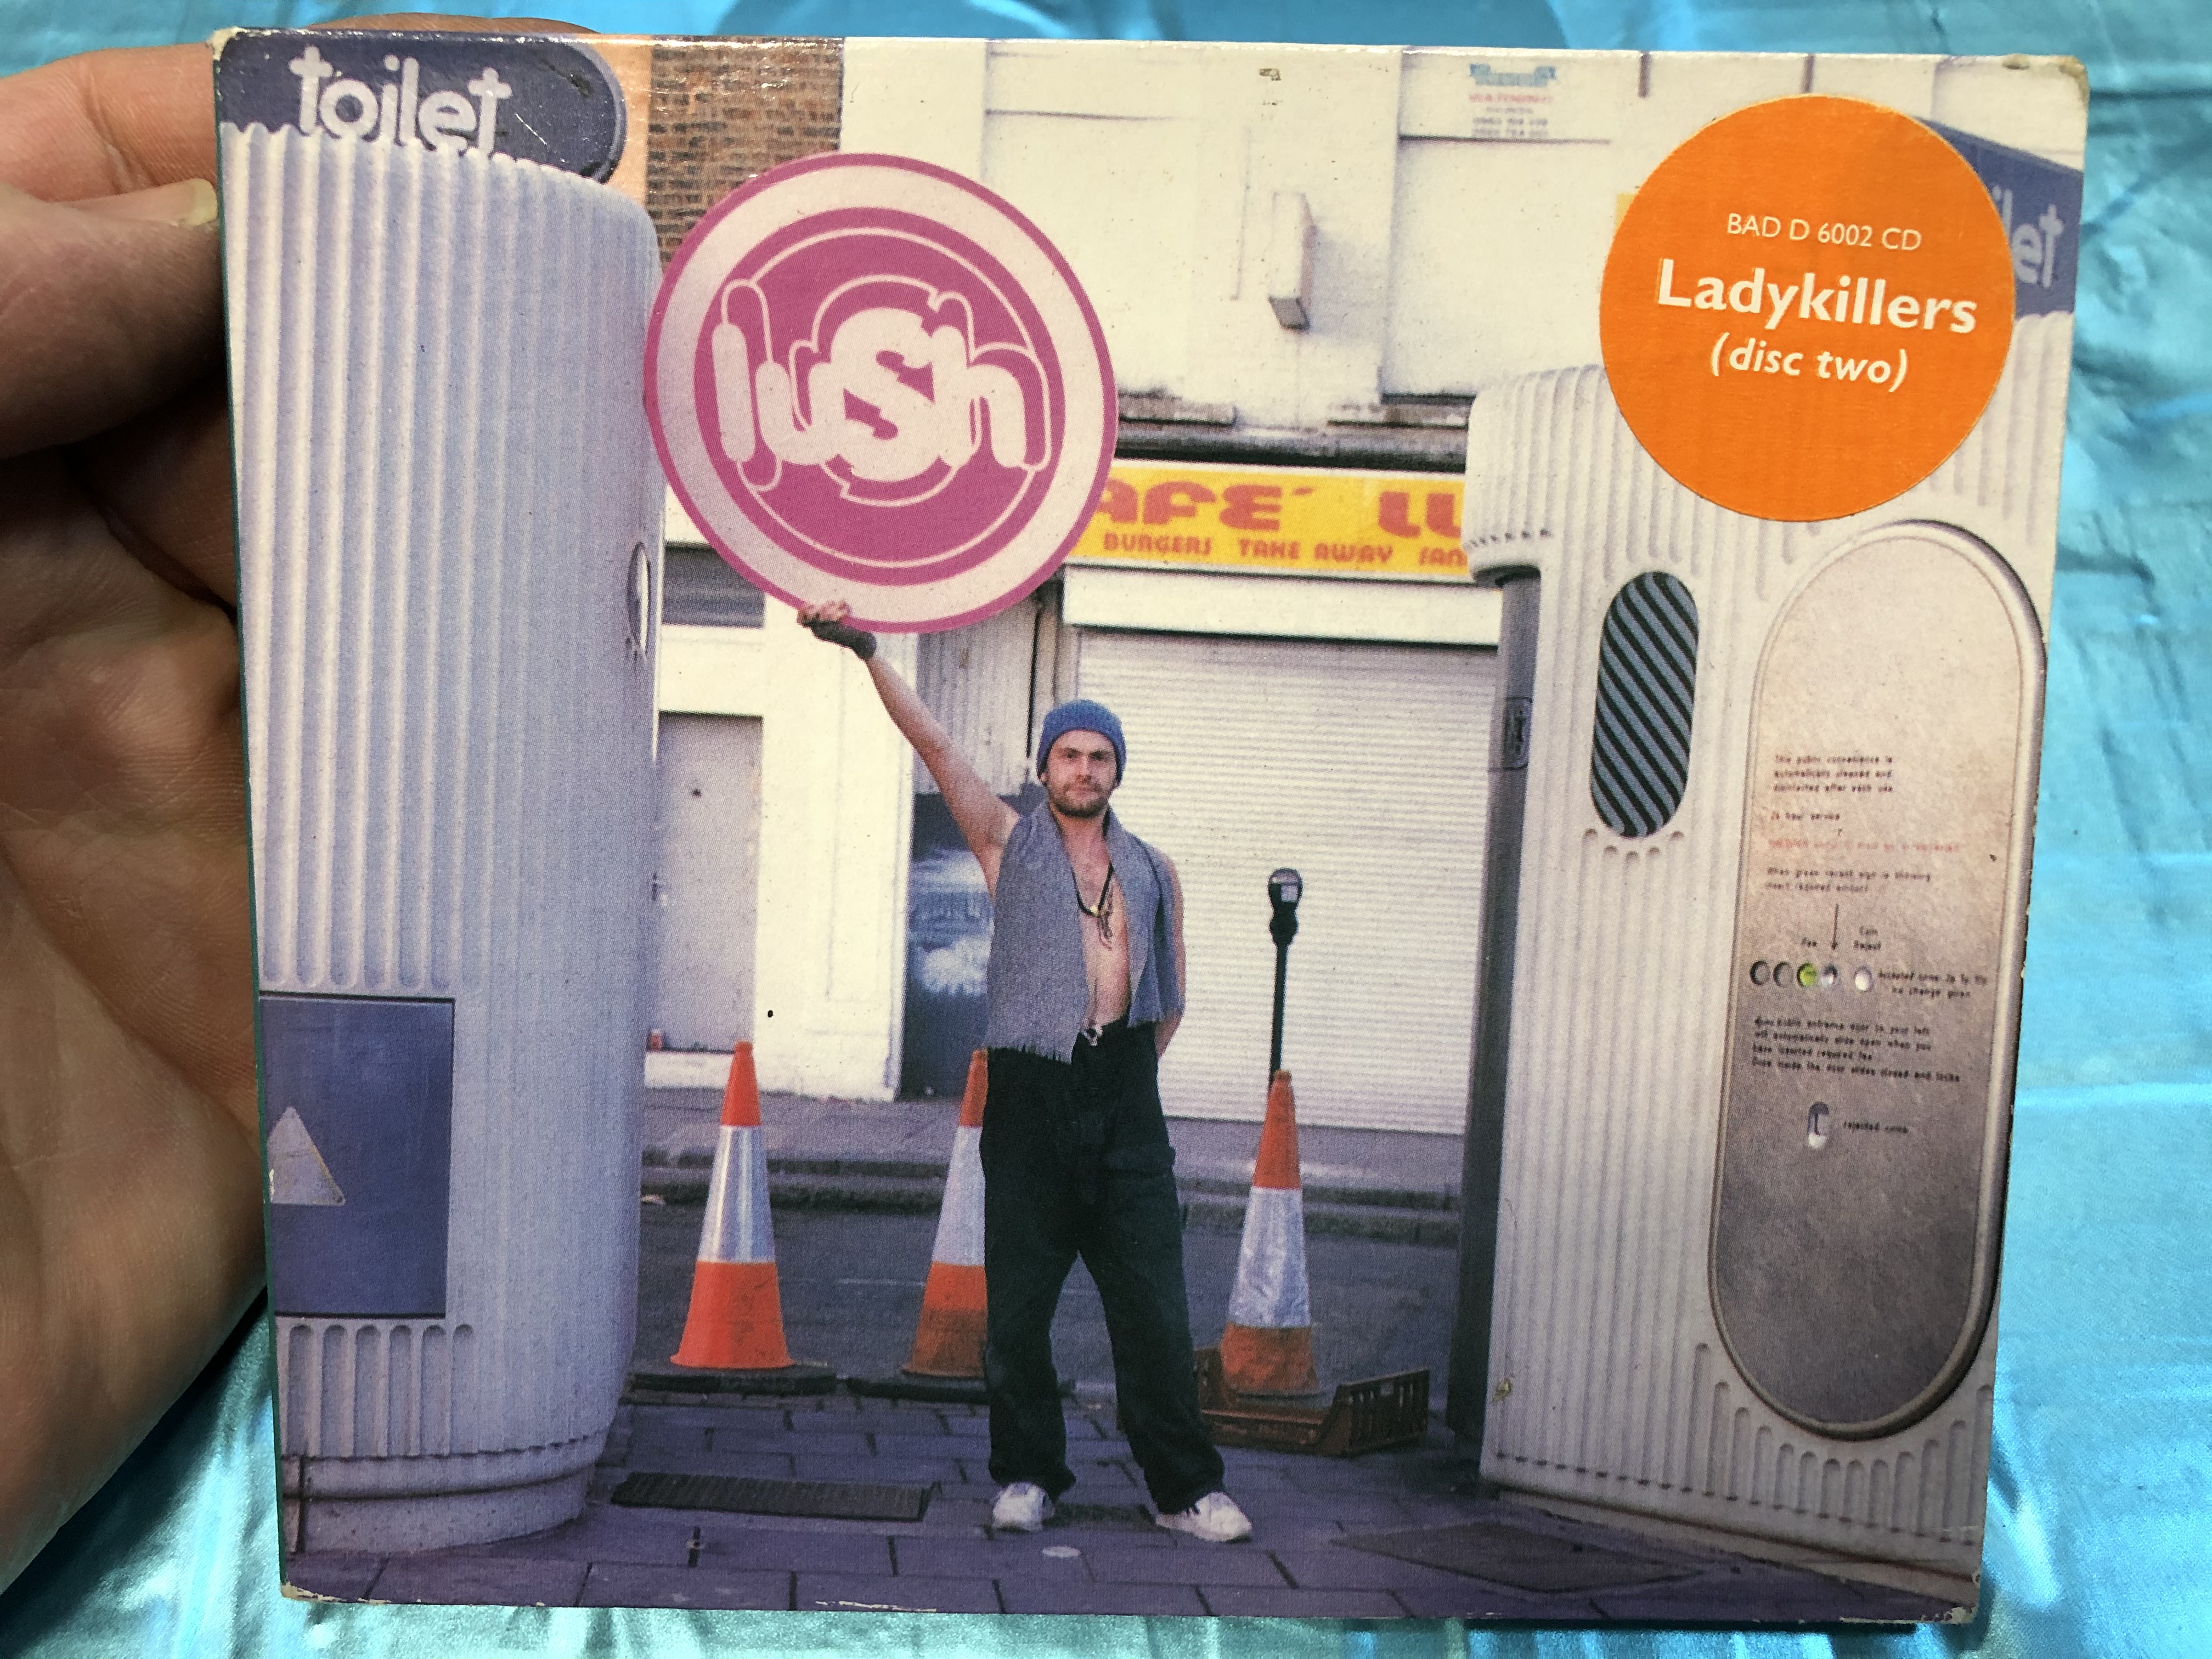 lush-ladykillers-disc-two-4ad-audio-cd-1996-bad-d-6002-cd-1-.jpg